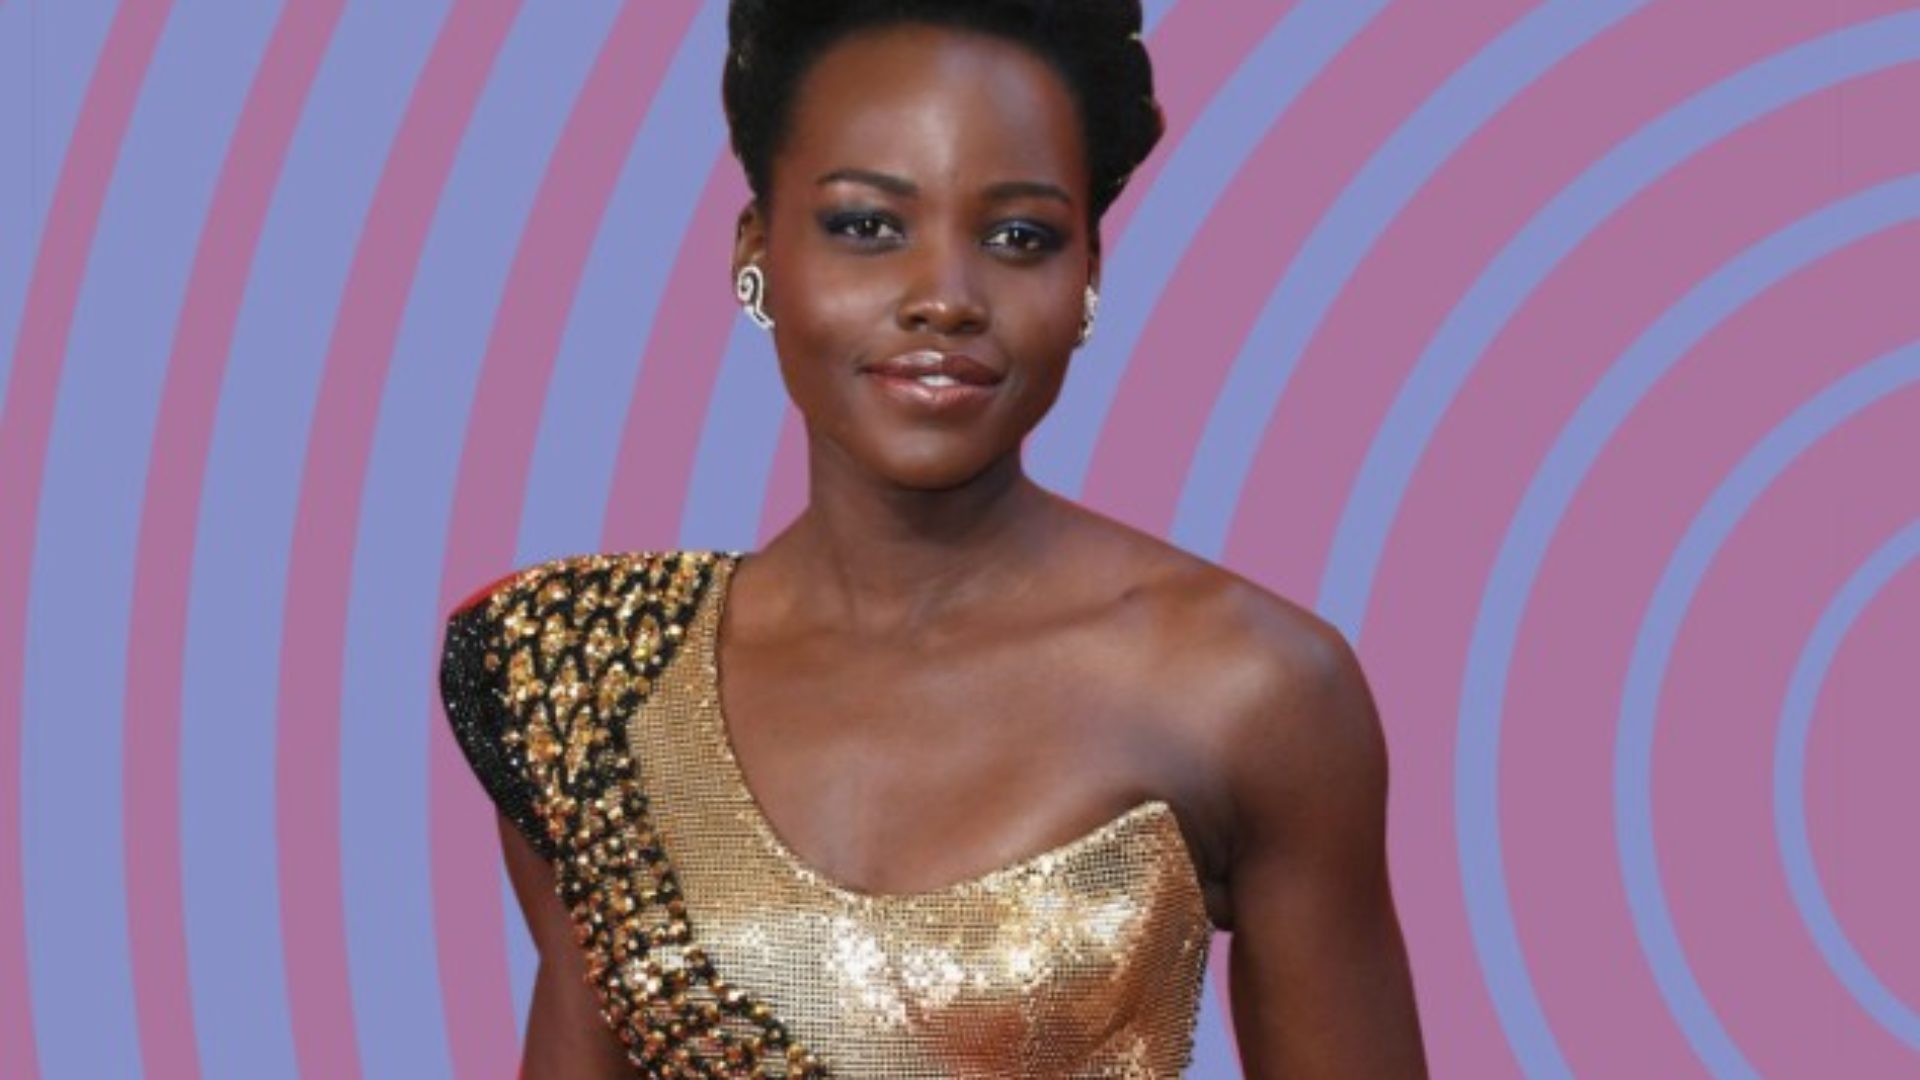 Lupita's Natural Bangs Are What Hair Goals Are Made Of